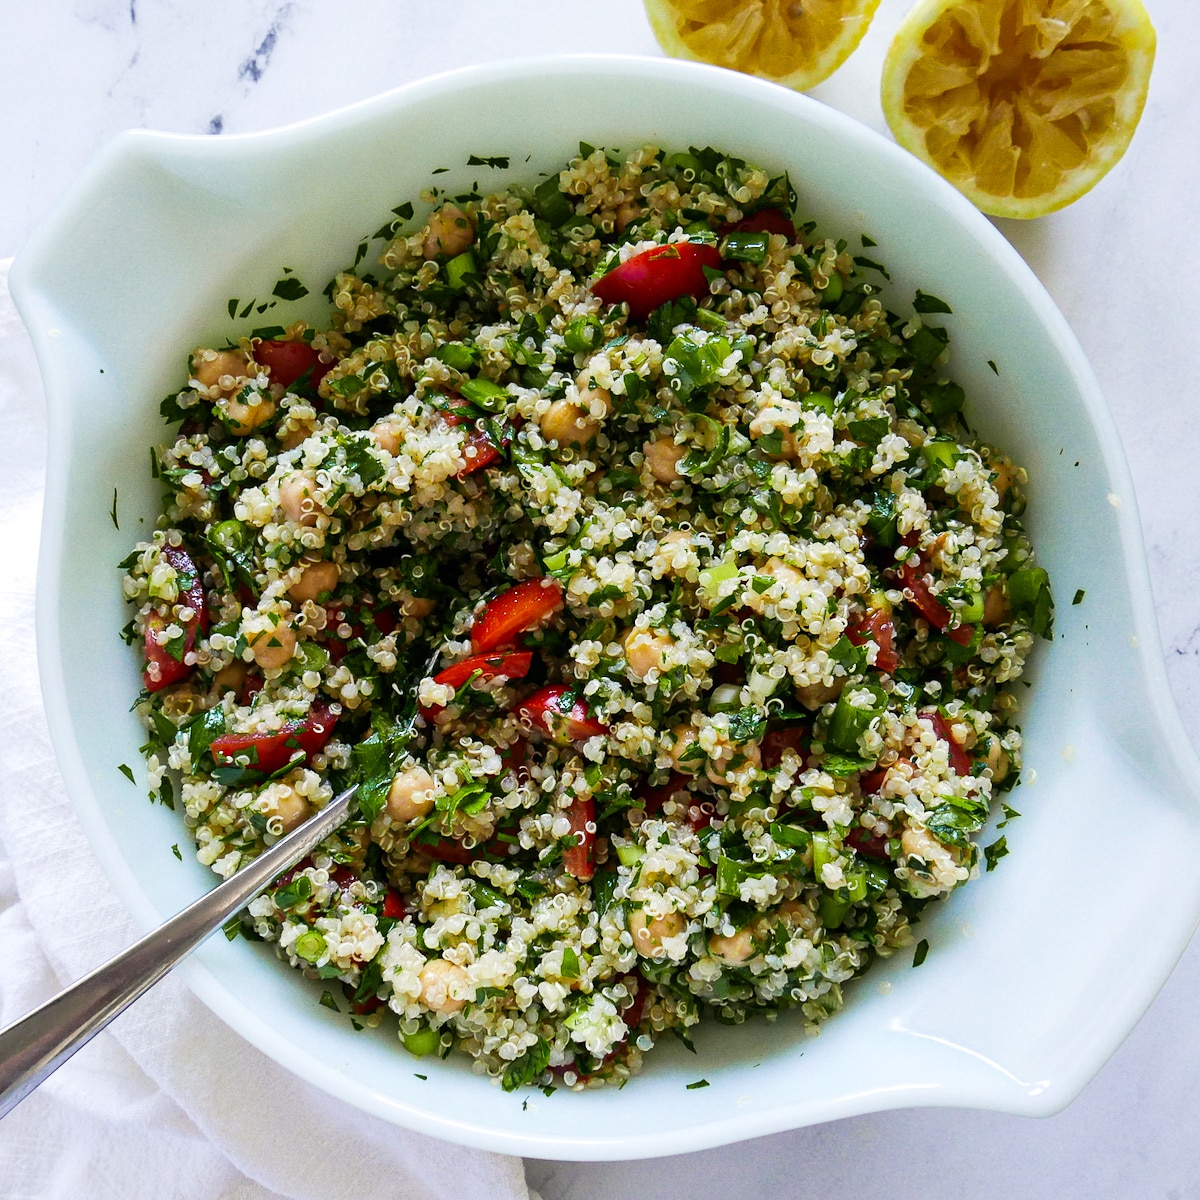 tabbouleh ingredients mixed together in a large bowl with spoon and lemon halves in background.